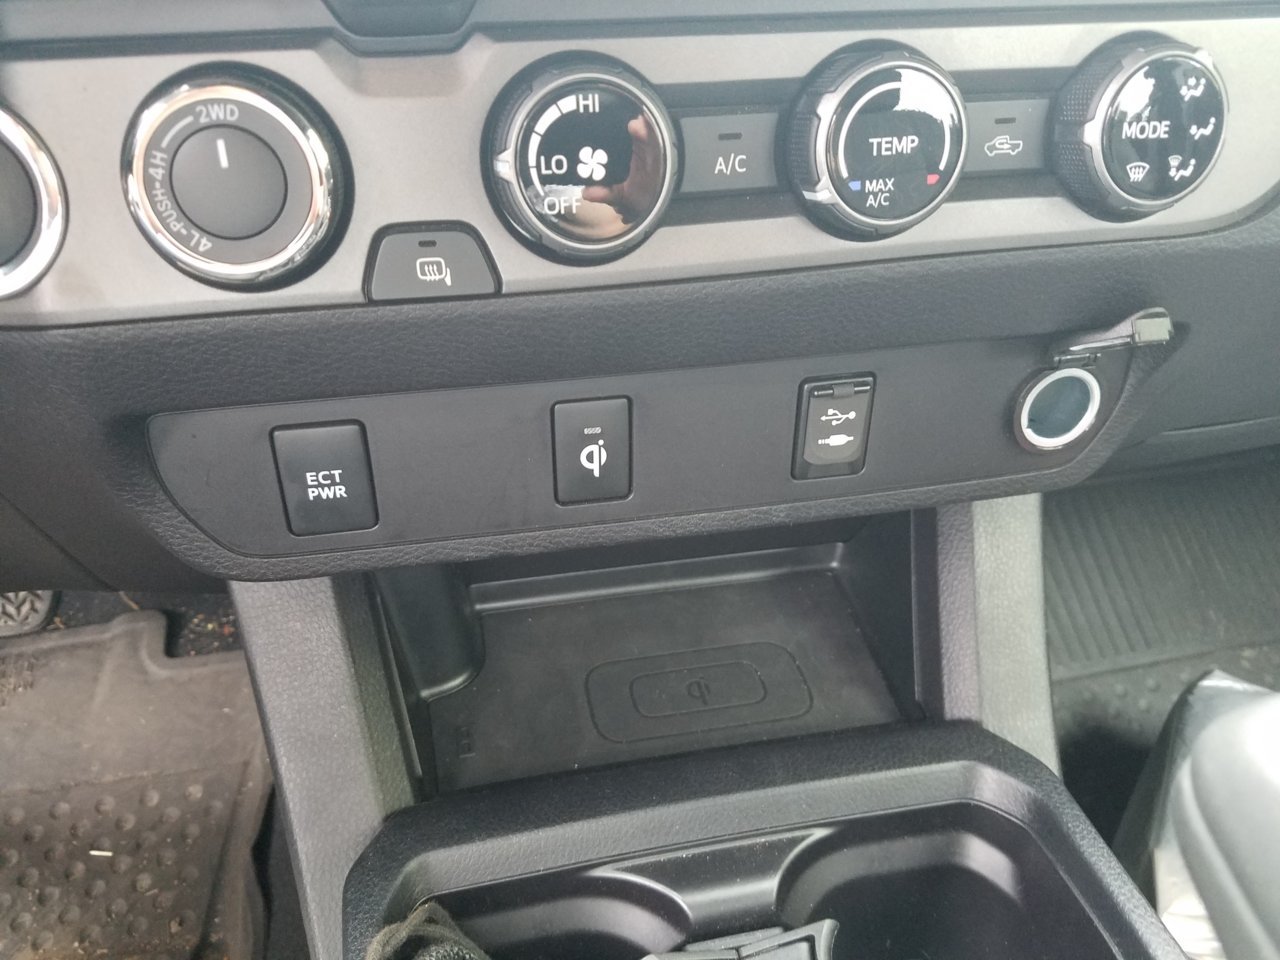 Install Heated Seats 3rd Gen Tacoma World, How Much To Add Aftermarket Heated Seats